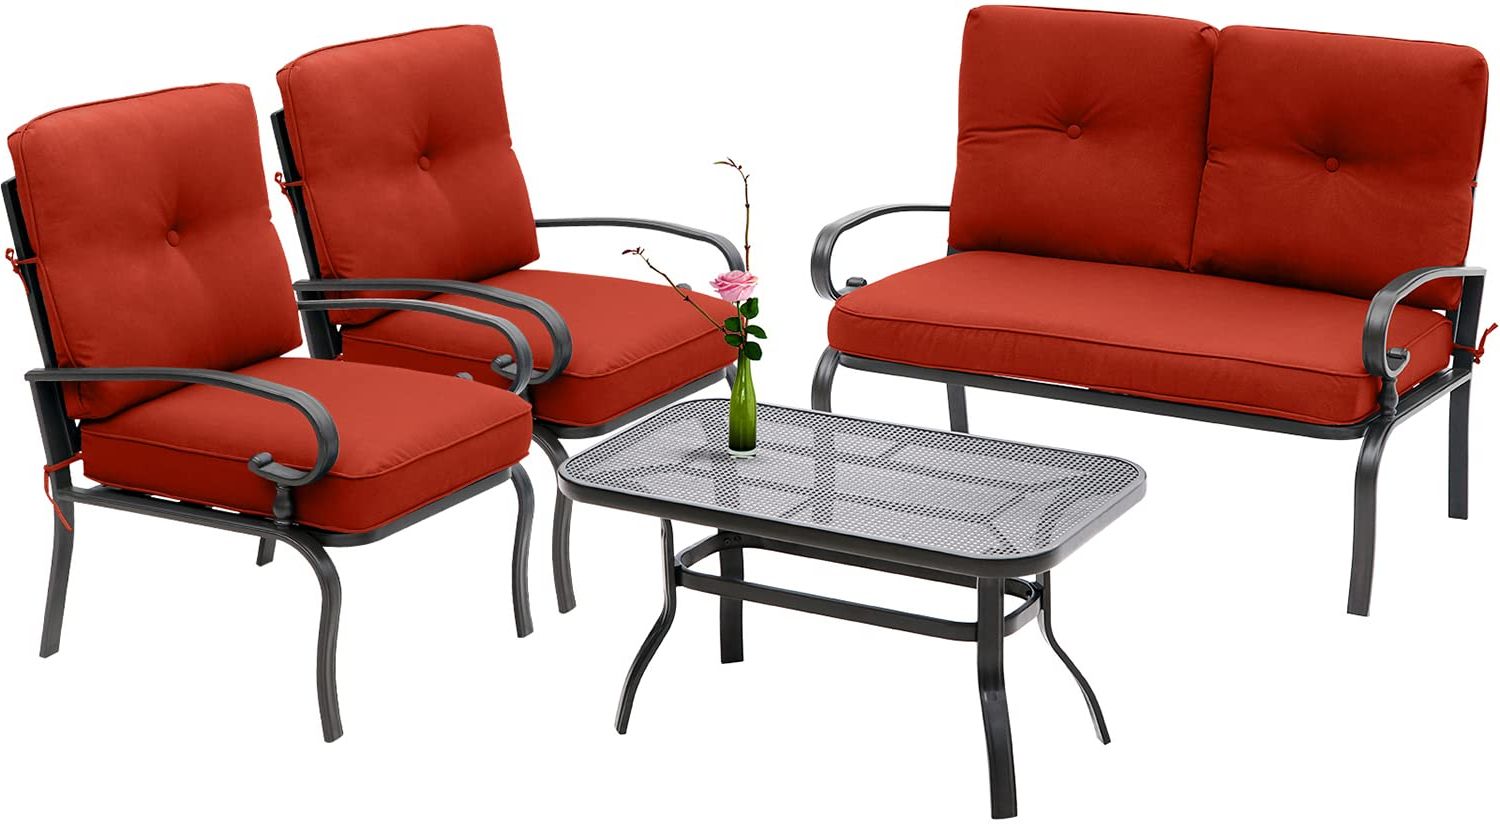 Side Table Iron Frame Patio Furniture Set Inside Famous Amazon: Incbruce 4pcs Outdoor Metal Furniture Sets Wrought Iron Patio  Furniture Conversation Set (loveseat, Coffee Table, 2 Chairs) – Steel Frame  Patio Seating Set With Red Cushions : Patio, Lawn & Garden (Photo 1 of 15)